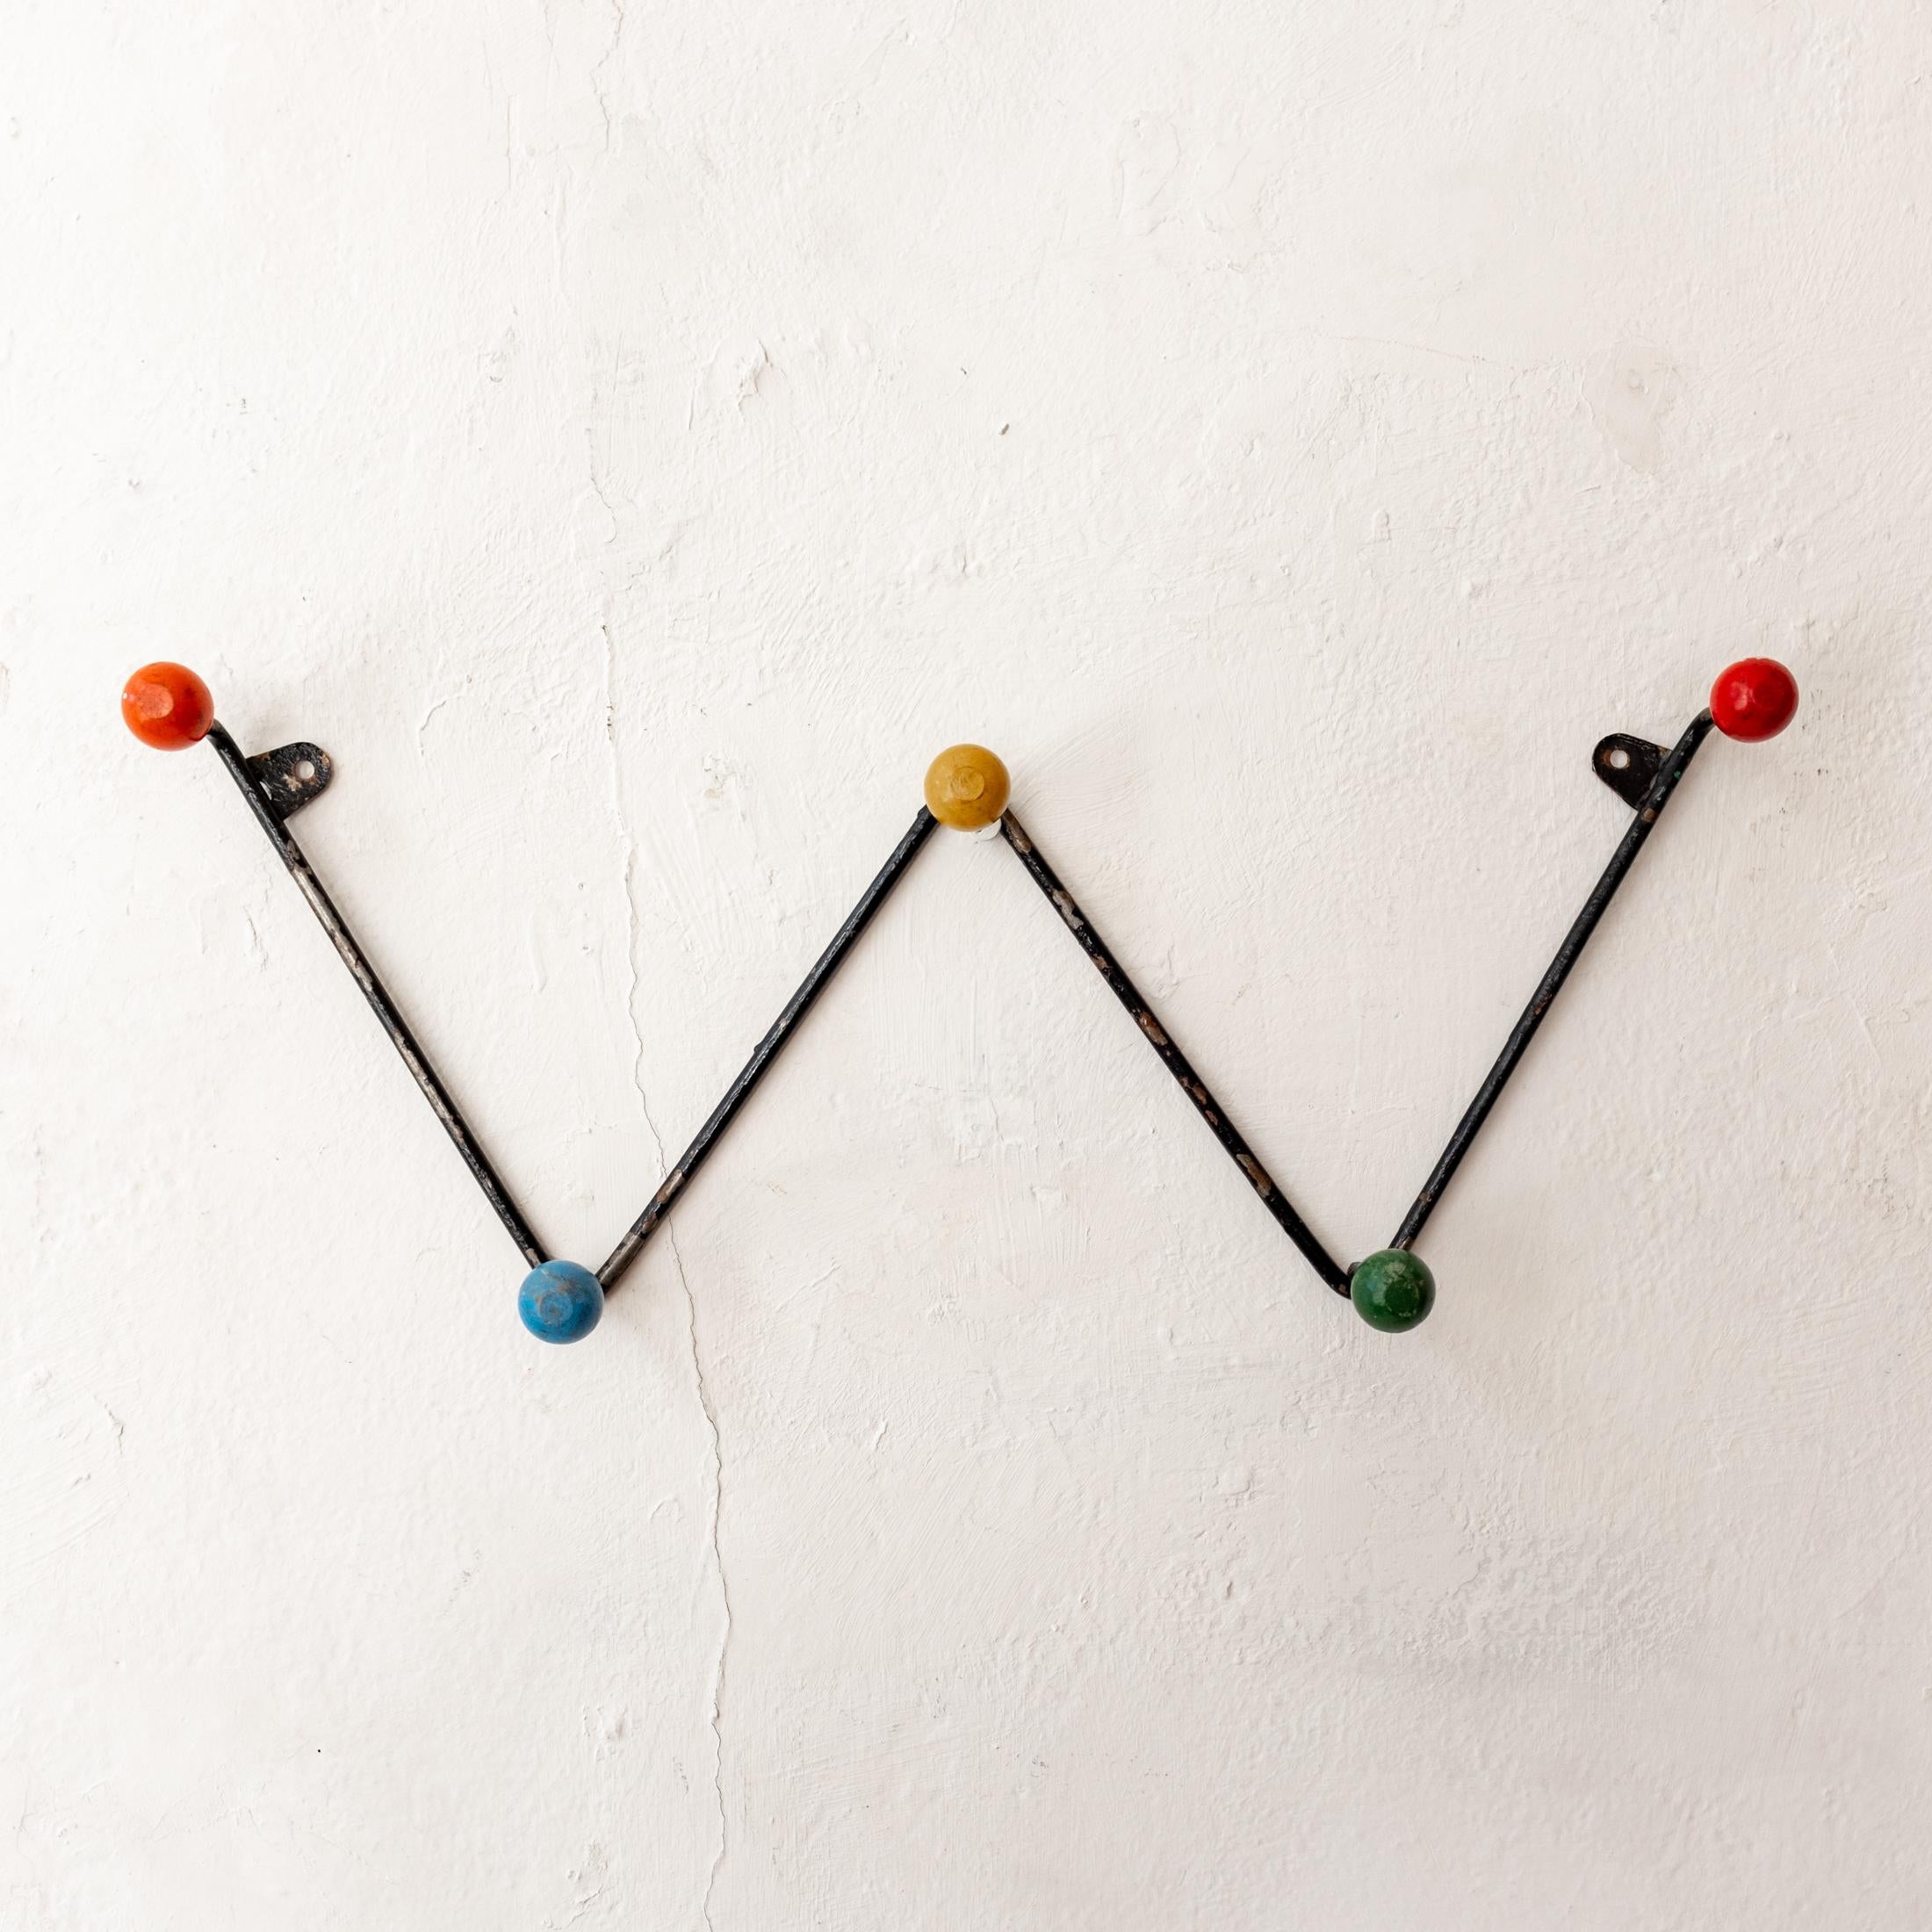 Wall mounted hat or coat rack from France. Solid rod iron frame with wood balls. Original paint with lovely patina. Two small brackets for screws allow for wall hanging. 1950s.